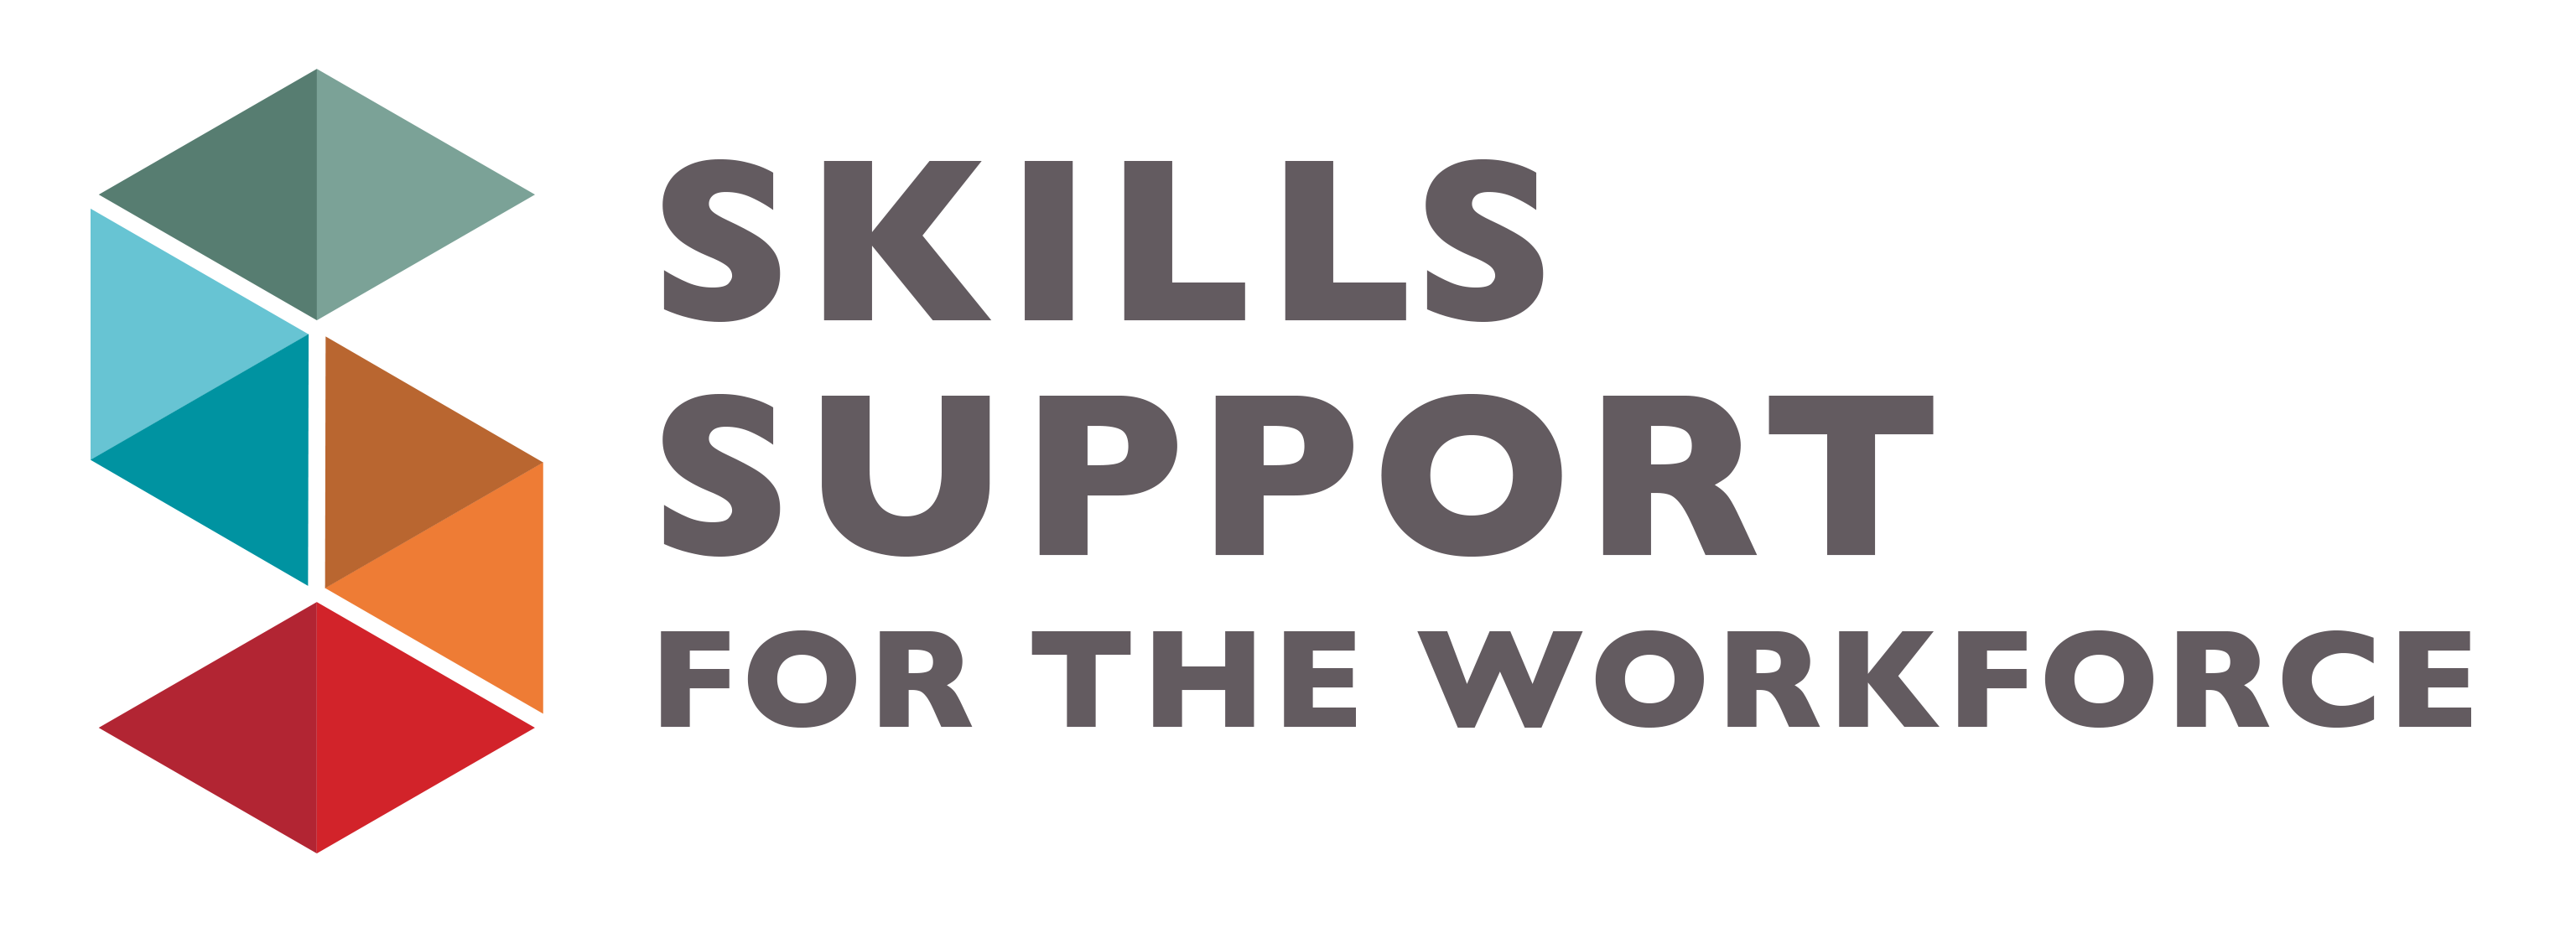 Skills Support for the Workforce – Black Country - BCLEP